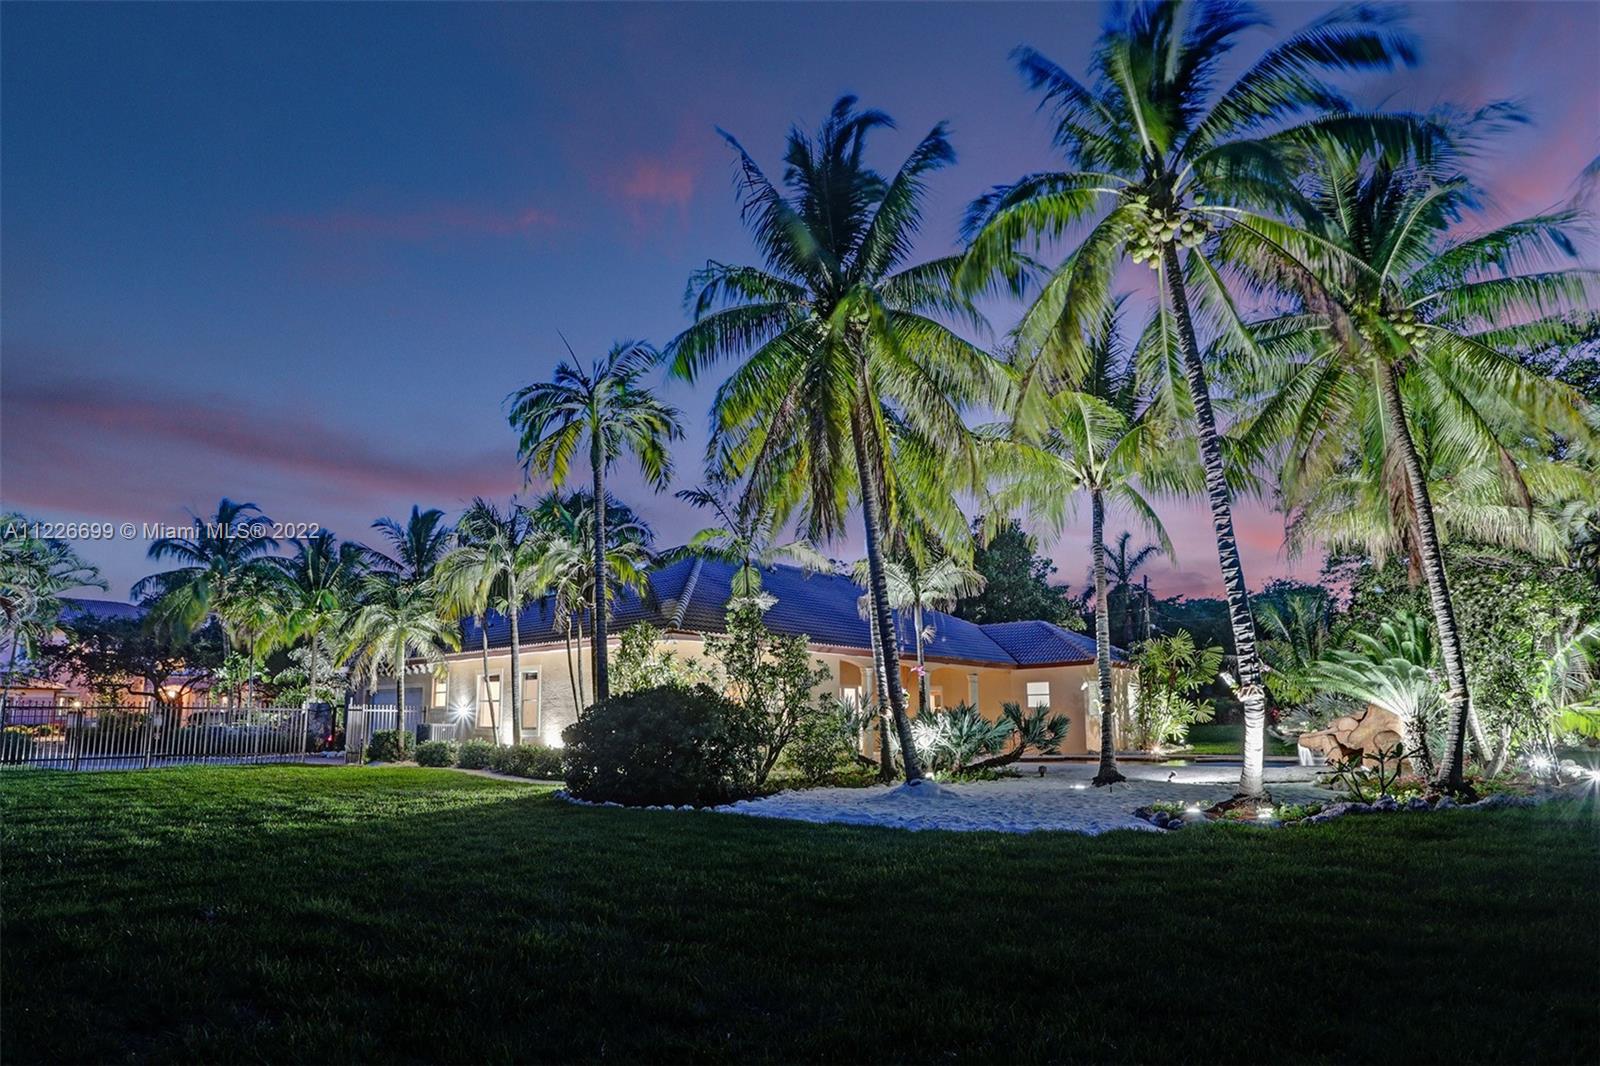 A Tropical Paradise Awaits. Nestled on a corner lot in one of the most sought-after areas in South Miami, this 5Bd/4Ba is one of only 9 exclusive homes that make up Ambience Estates. From the rare coral rock wall that encompasses the front perimeter to the custom & fully automated, saltwater lagoon pool & waterfall in the back, this private oasis meshes opulence with tranquility. Step inside to elegant stone flooring throughout, soaring ceilings, an oversized master suite with his/hers walk-in closets & vanities, & an open kitchen looking out on the grand family room. Entertain outside on the coral rock pool & spa deck, amidst the lush landscaping surrounded by gorgeous palms swaying over your own personal beach. Live luxuriously in an ultra-quiet neighborhood in the perfect location.